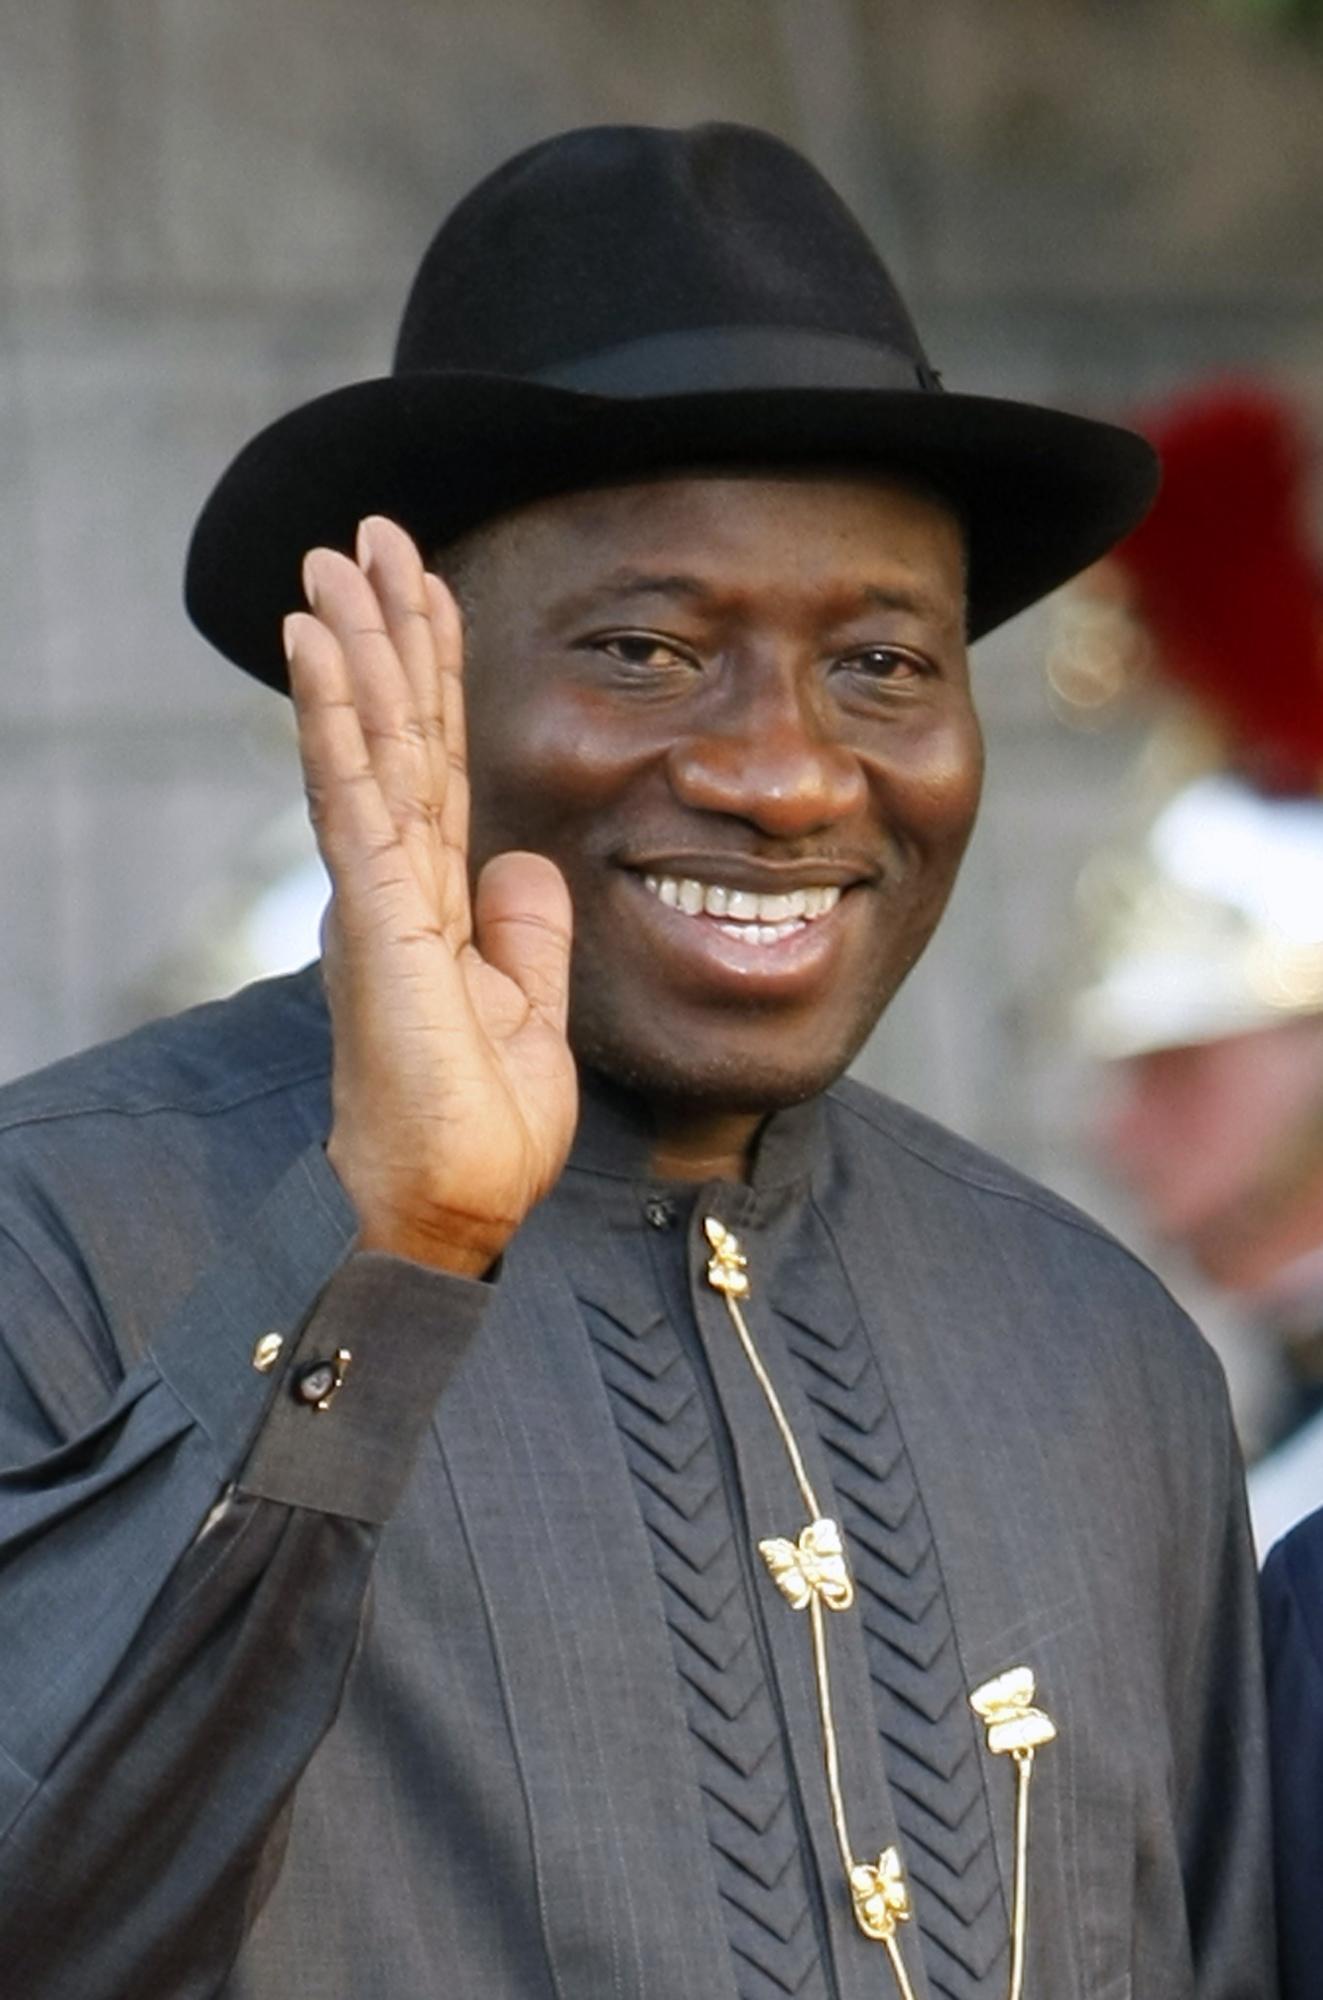 Jonathan: The Rise Of Africa’s New Breed Of Leaders